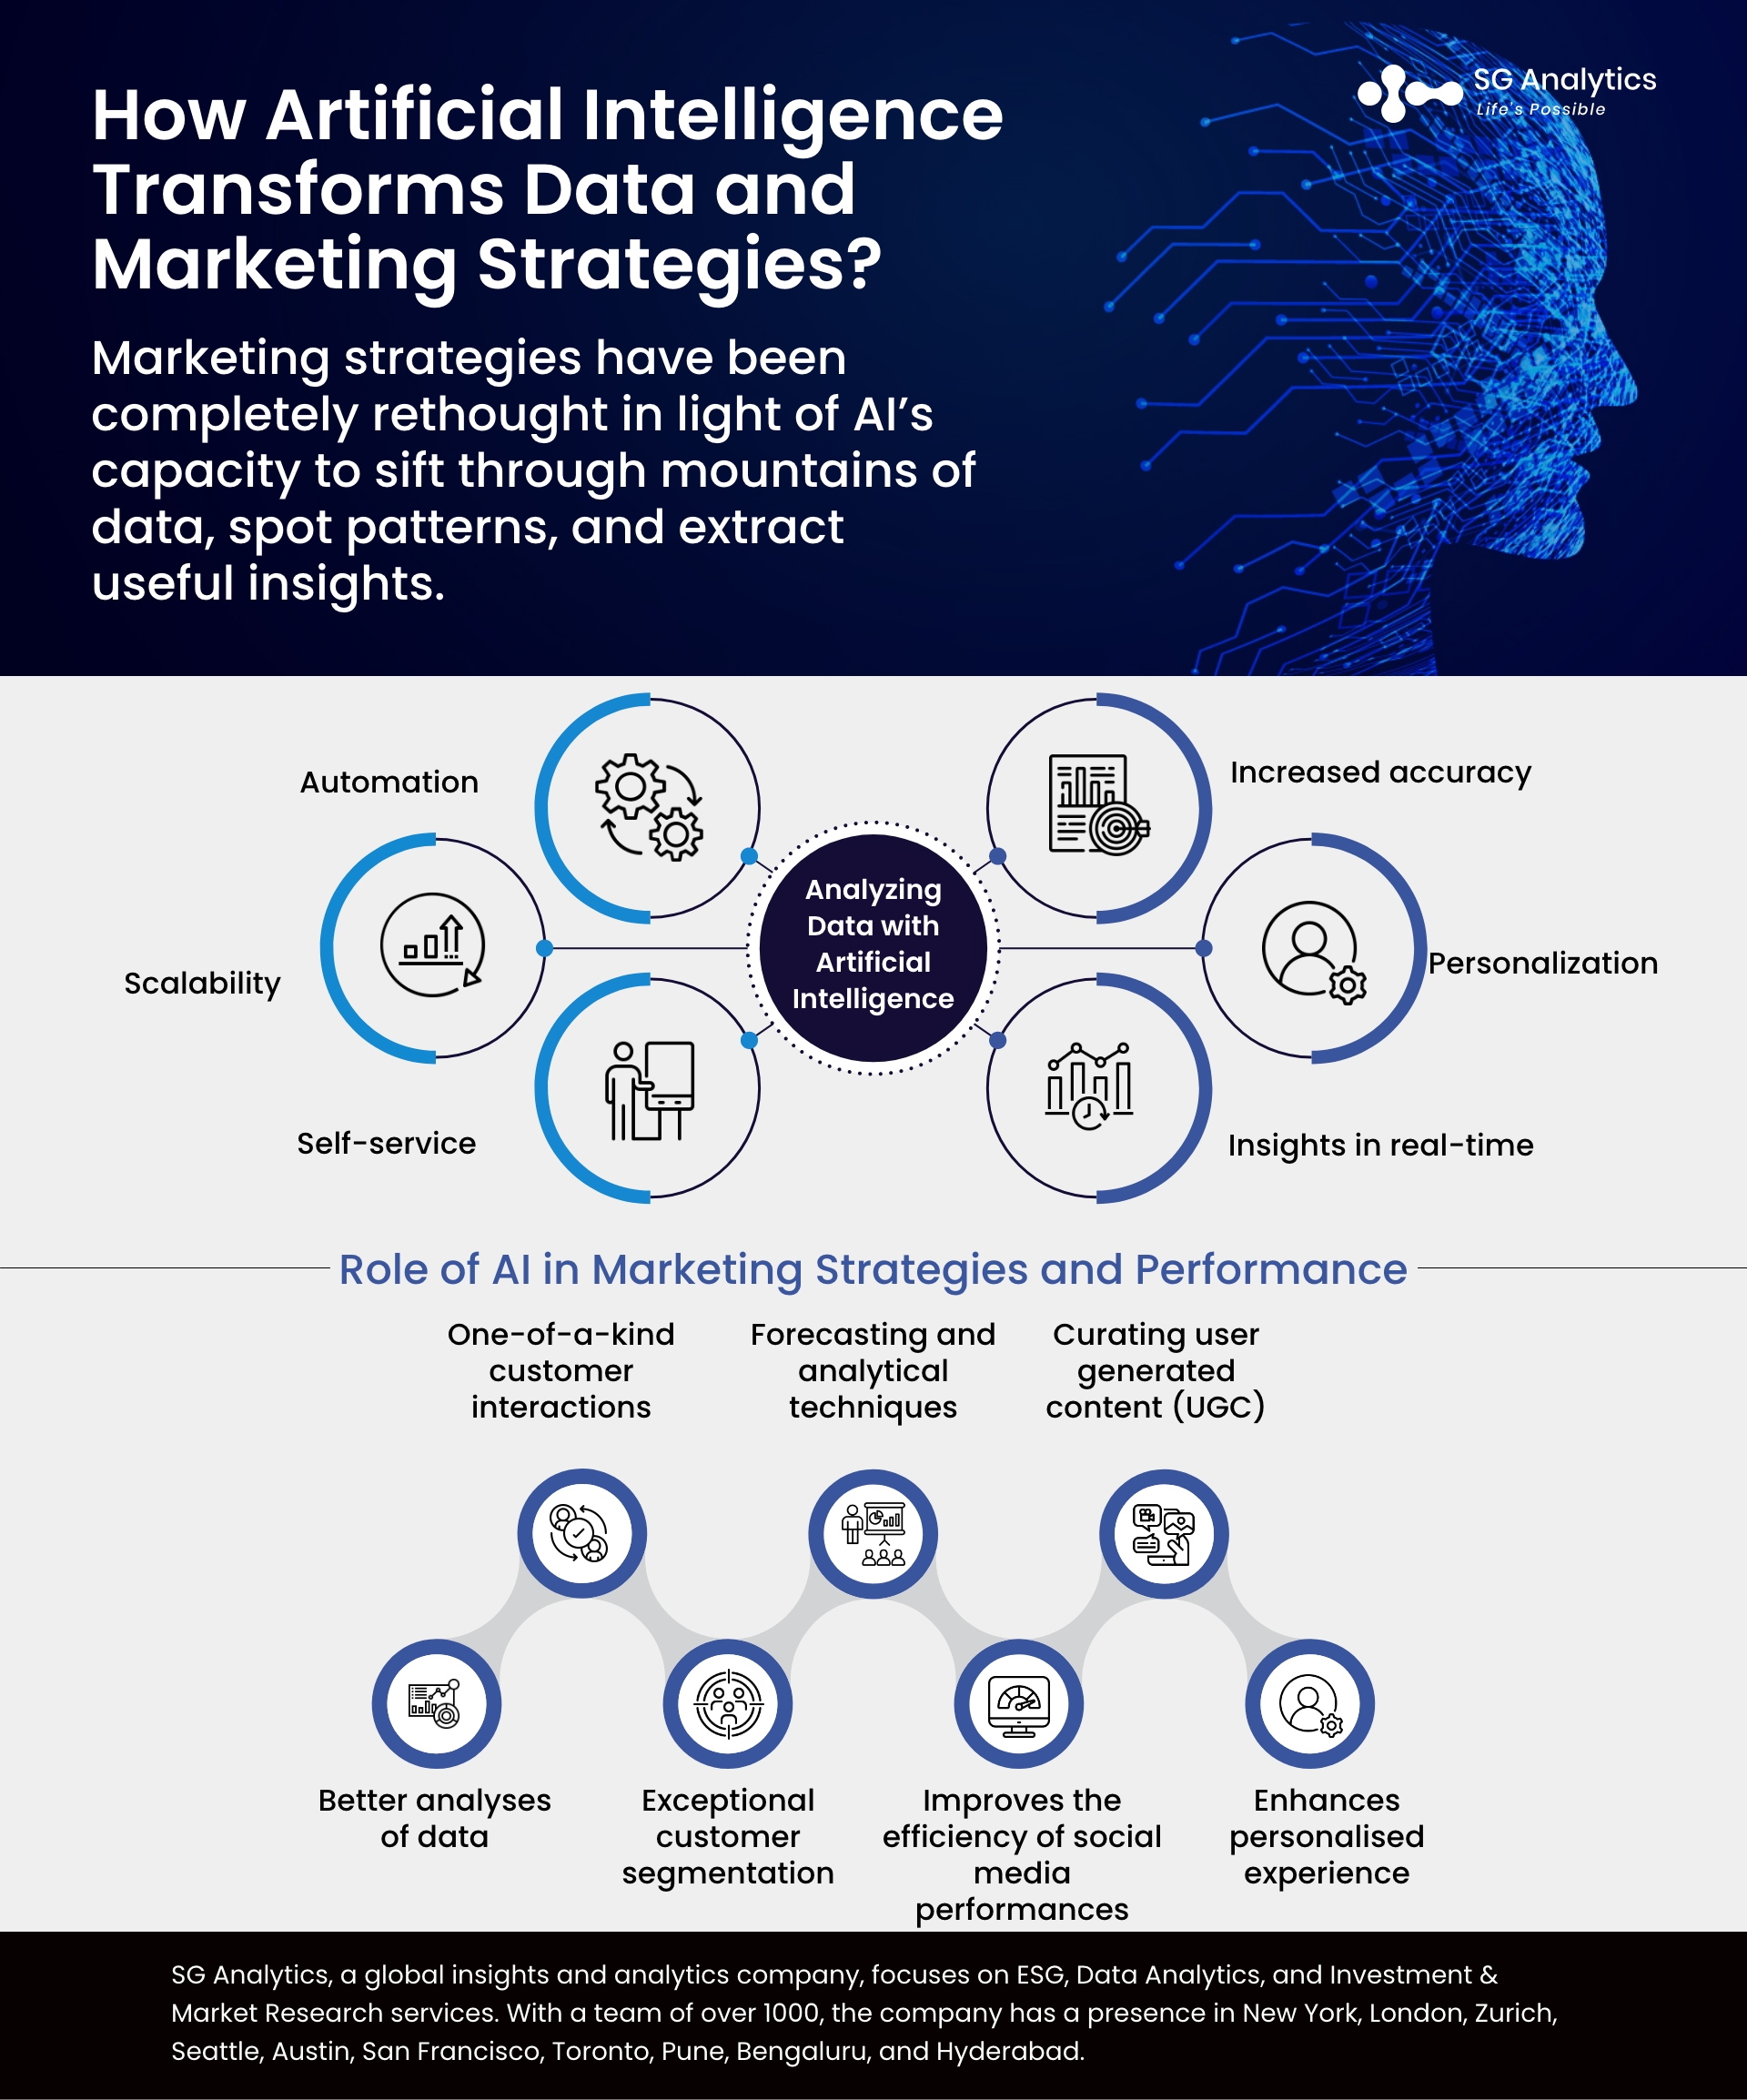 How Artificial Intelligence Transforms Data and Marketing Strategies